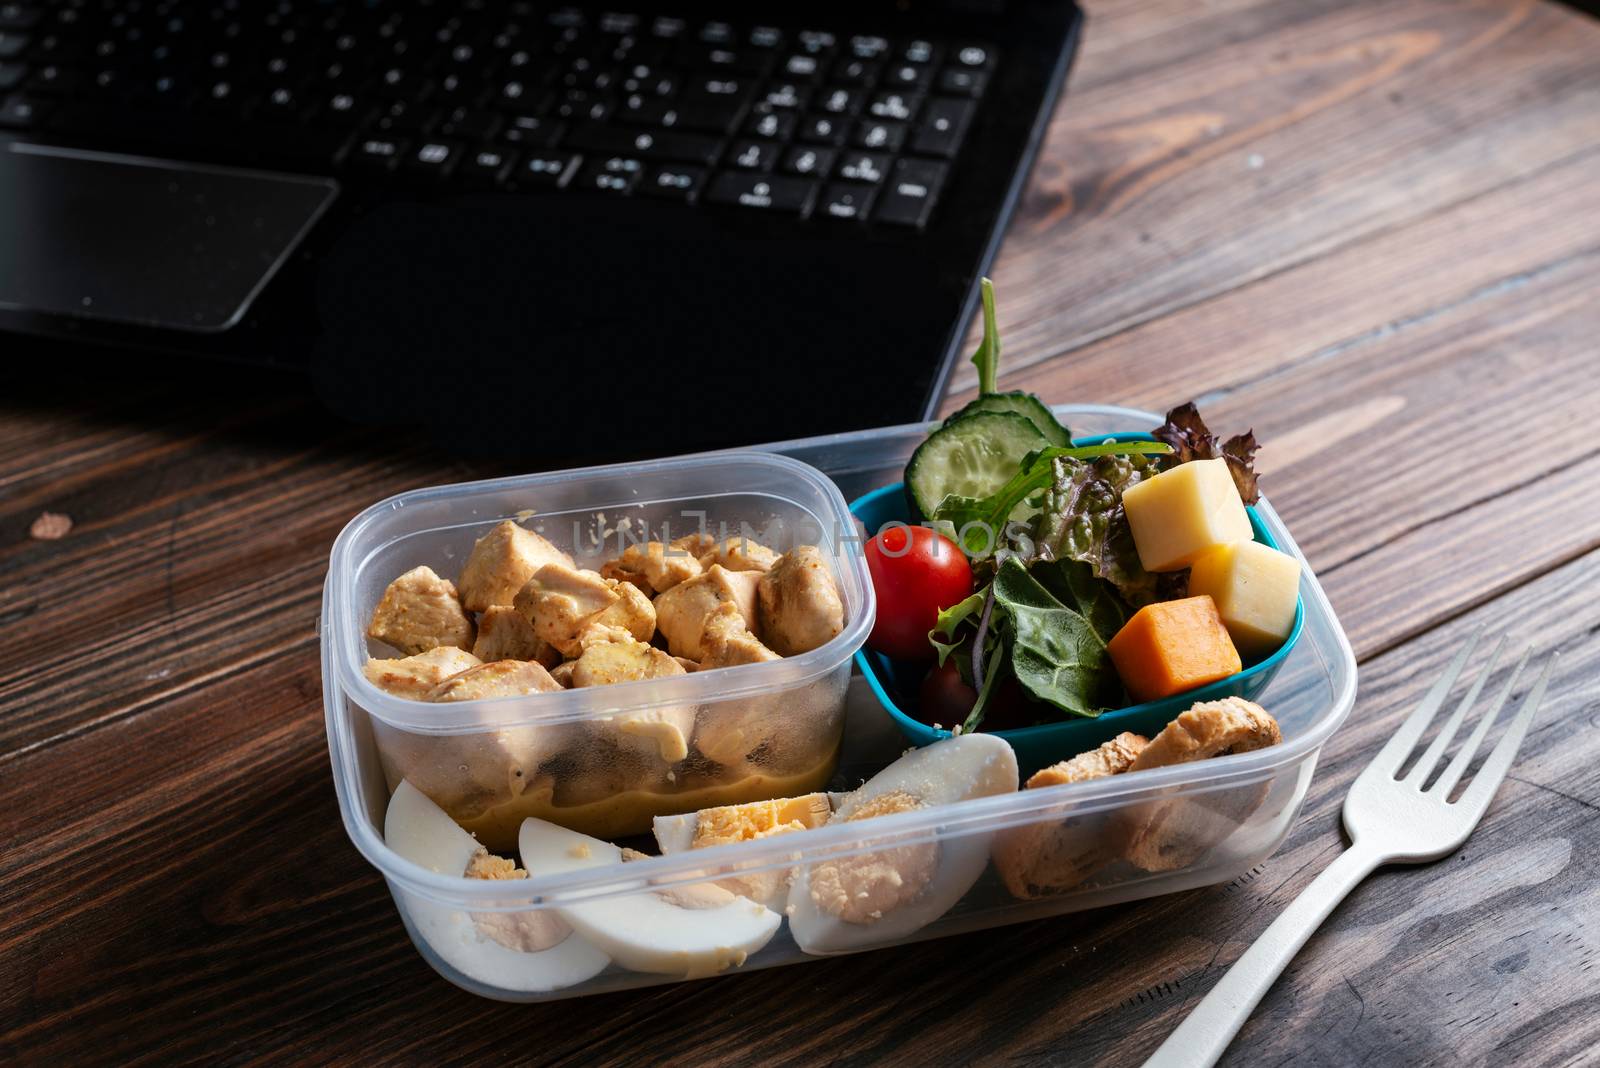 Healthy food in lunch box, on working table with laptop .eating at workplace. Home food for office concept 